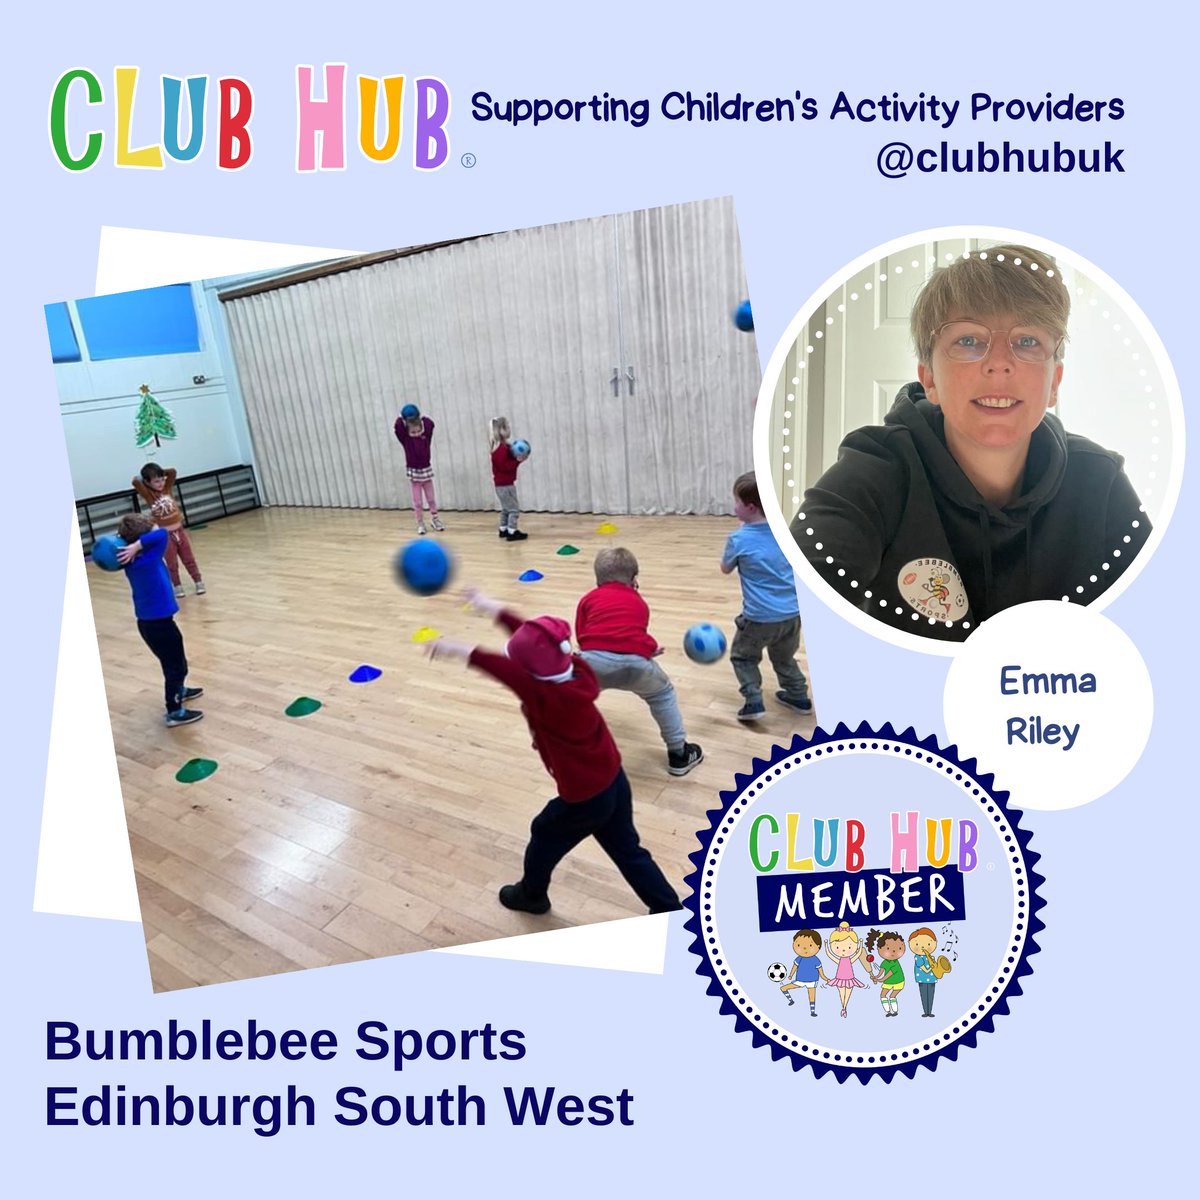 Are you looking for preschool activities in Edinburgh? @bumblebeesports Edinburgh South West and Corstorphine - Multisports classes and holiday clubs for ages 2-10 years. Contact Emma emma@bumblebeesports.co.uk #clubhubmember #multisportsforkids #edinburgh #edinburghmums